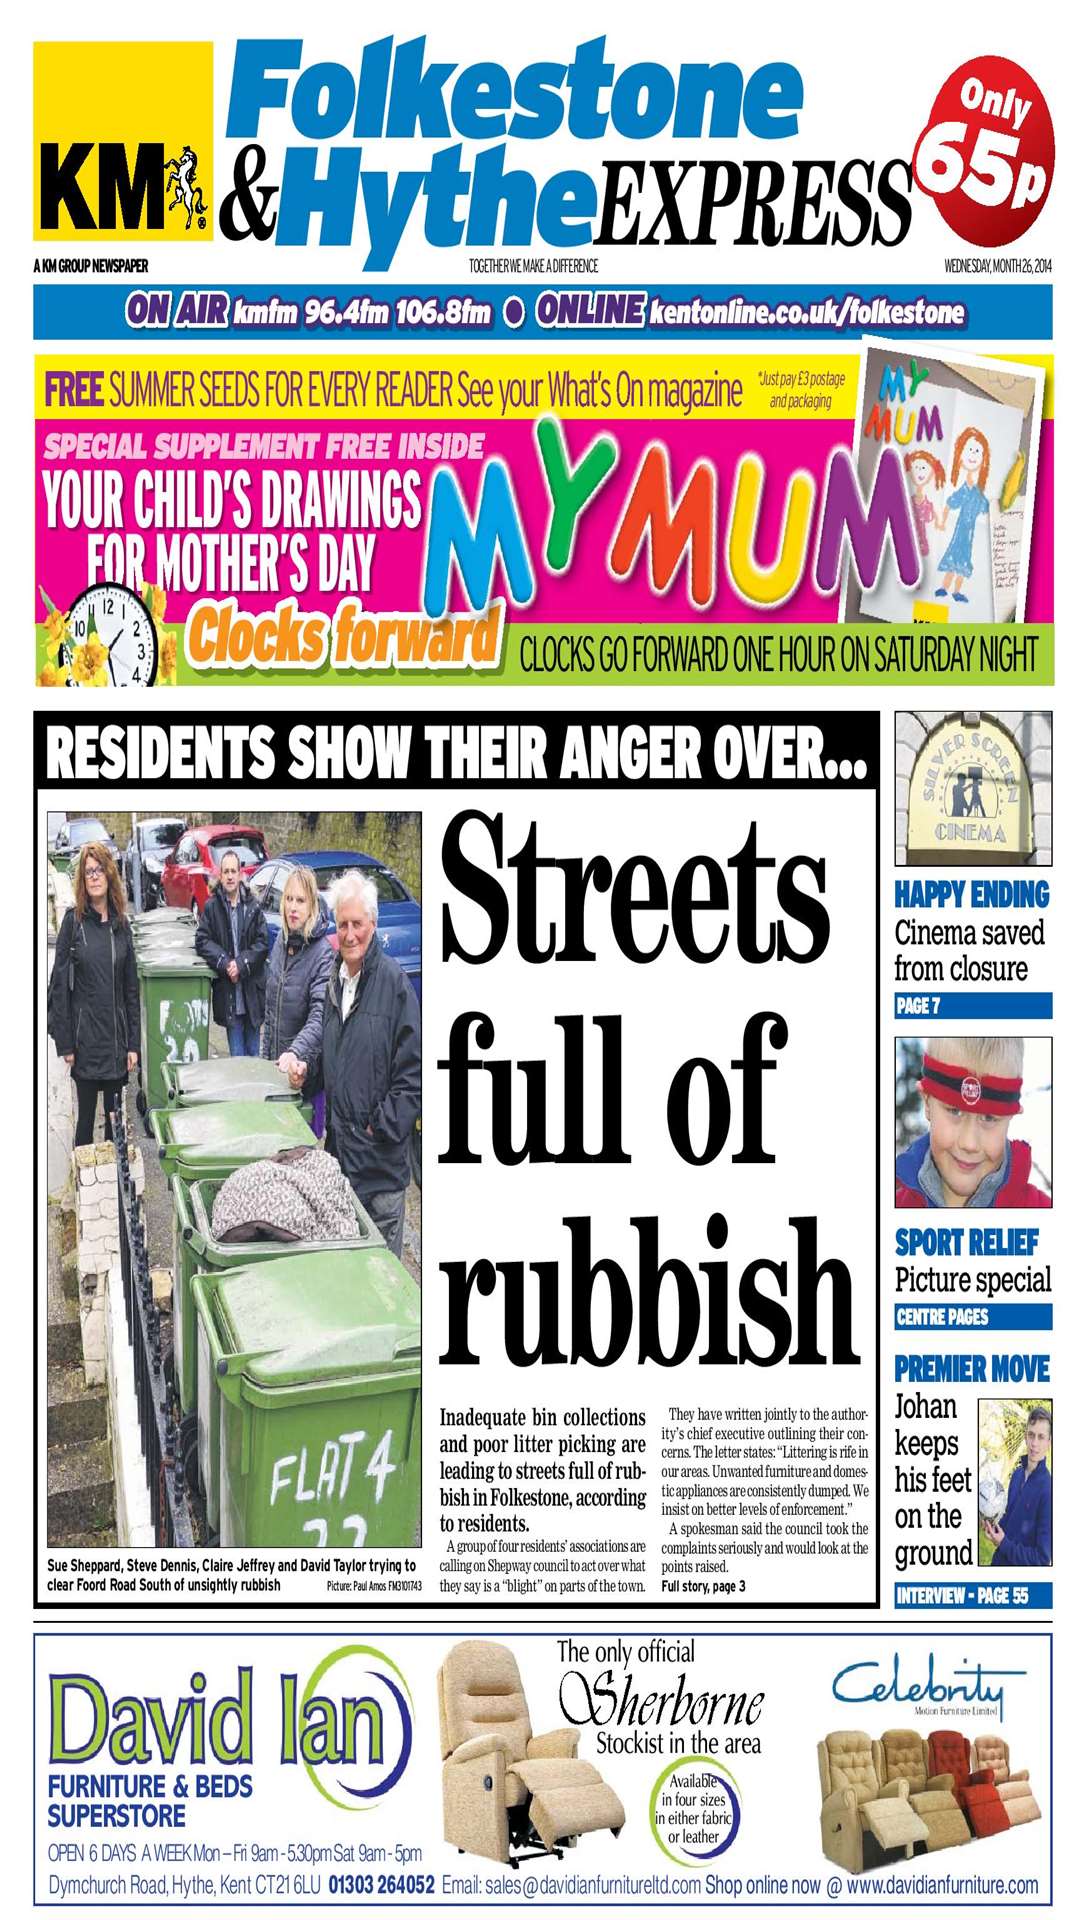 Your Folkestone & Hythe Express is out now! Just 65p